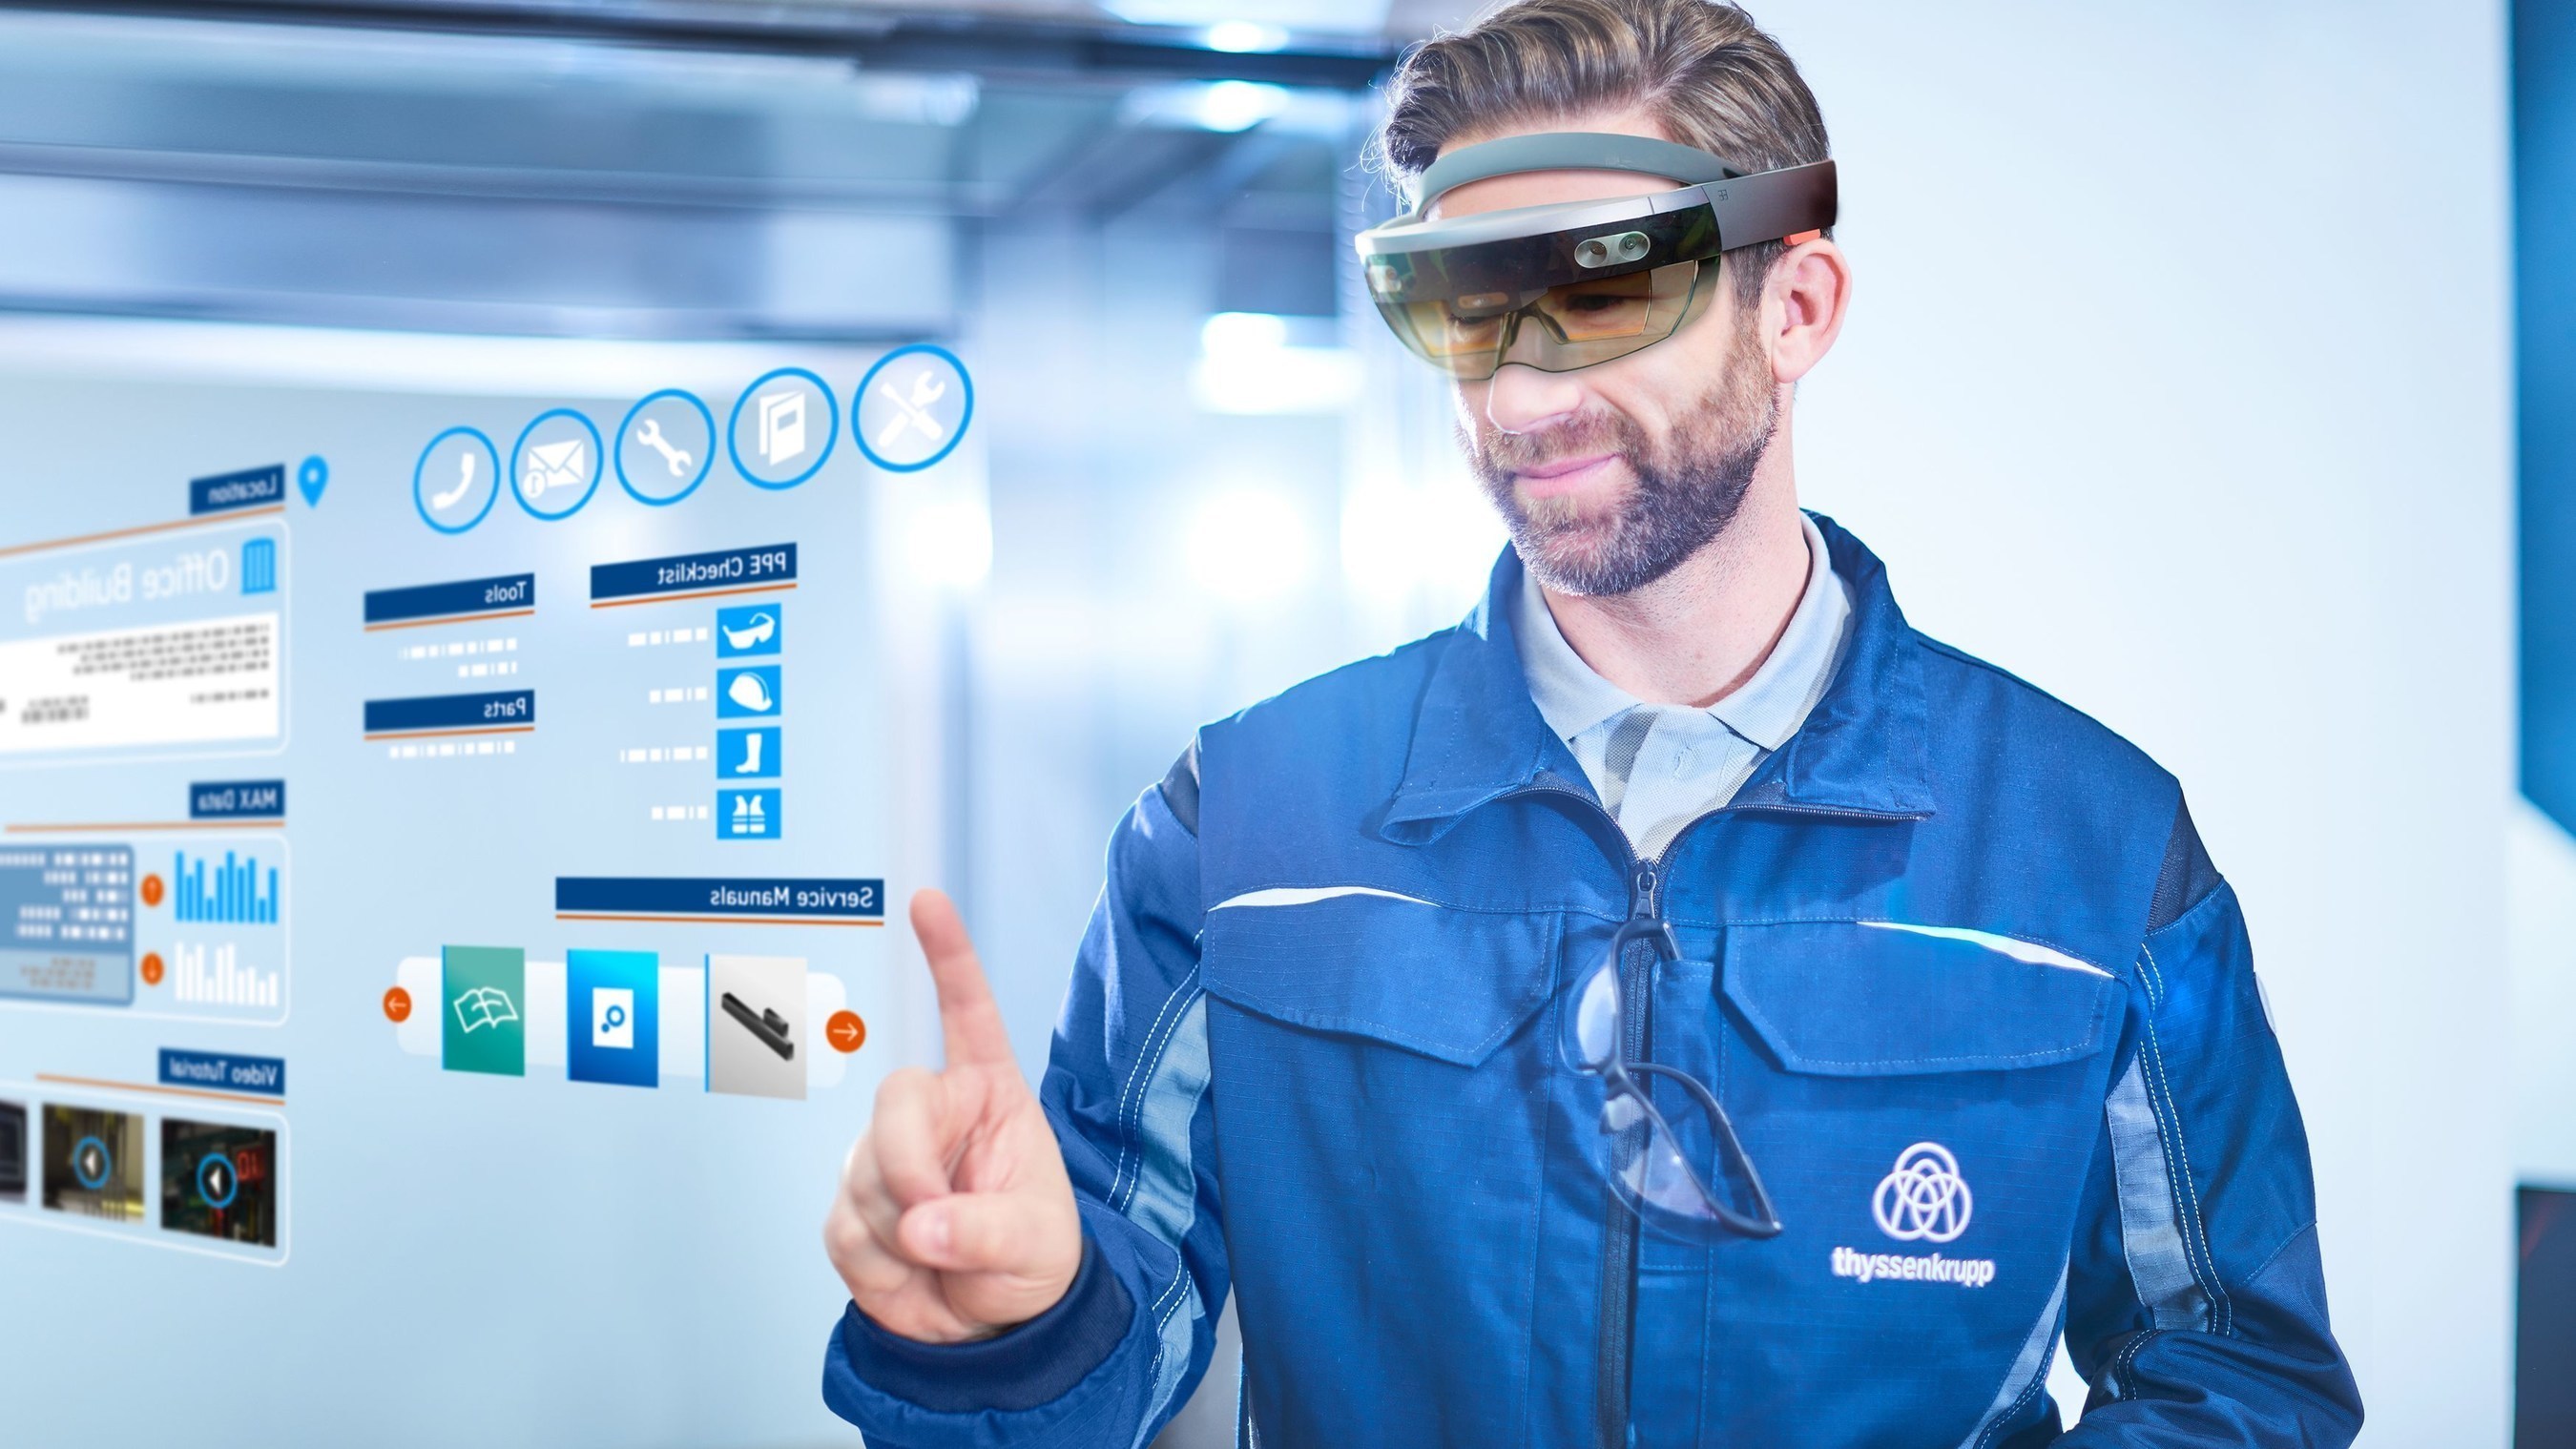 HoloLens will support thyssenkrupp elevator technicians prior to and on the job site, significantly reducing service intervention times. (PRNewsFoto/thyssenkrupp Elevator AG)